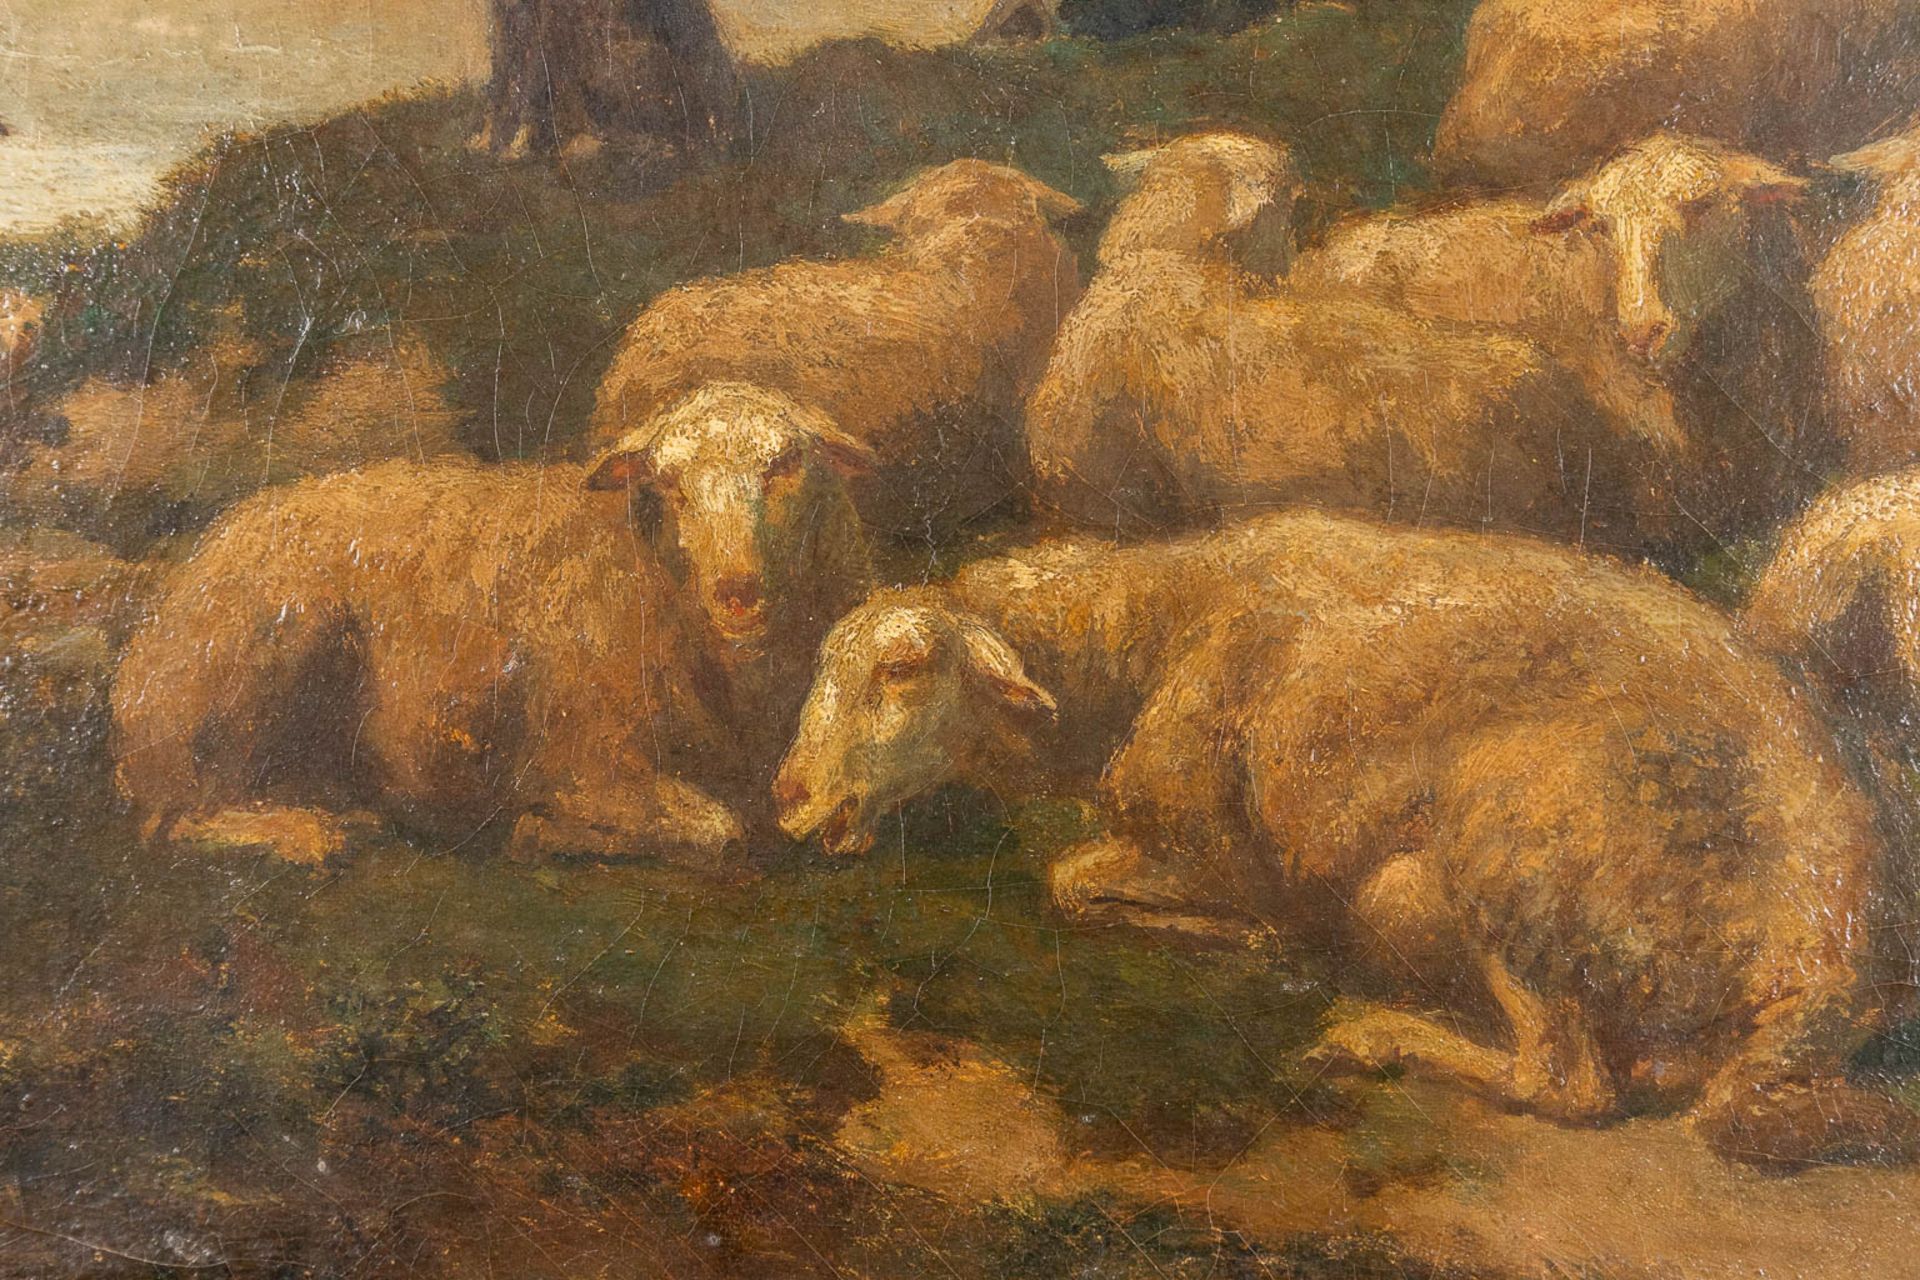 Edouard WOUTERMAERTENS (1819-1897) 'Sheep and shepperd', oil on canvas. (W: 50 x H: 30 cm) - Image 5 of 8